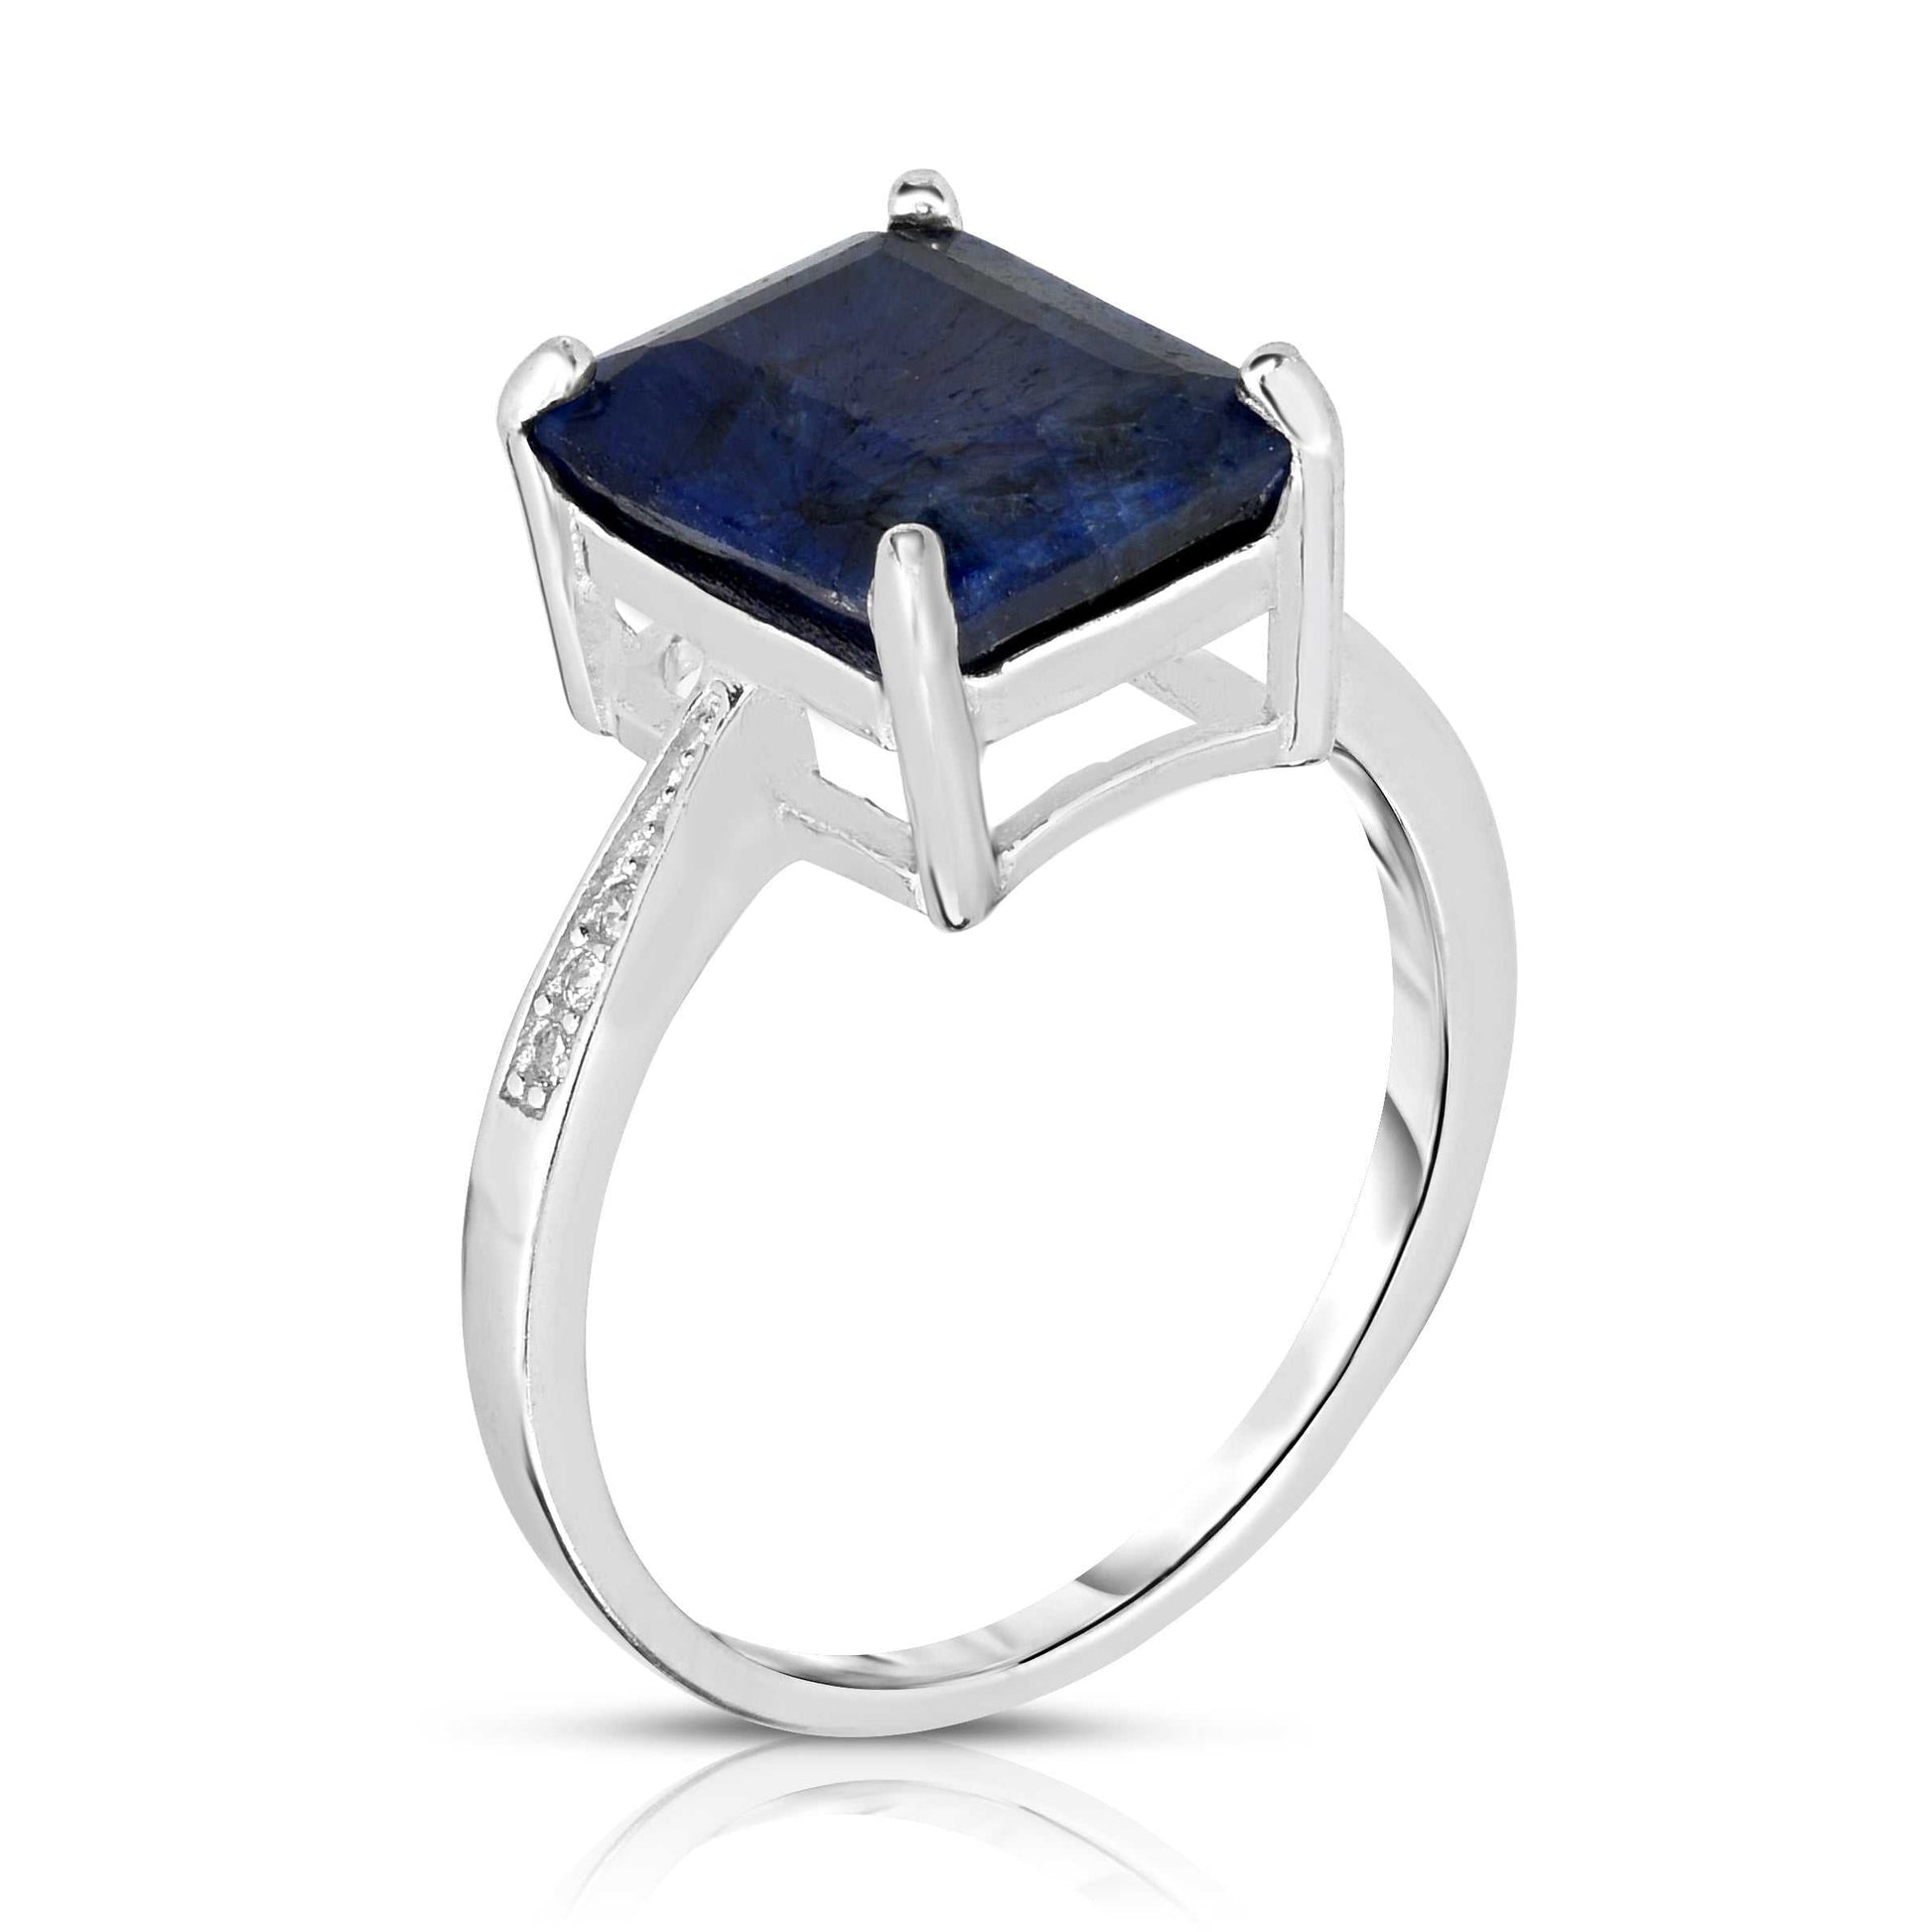 4.00 CTW Emerald Cut Genuine Sapphire Ring in Sterling Silver